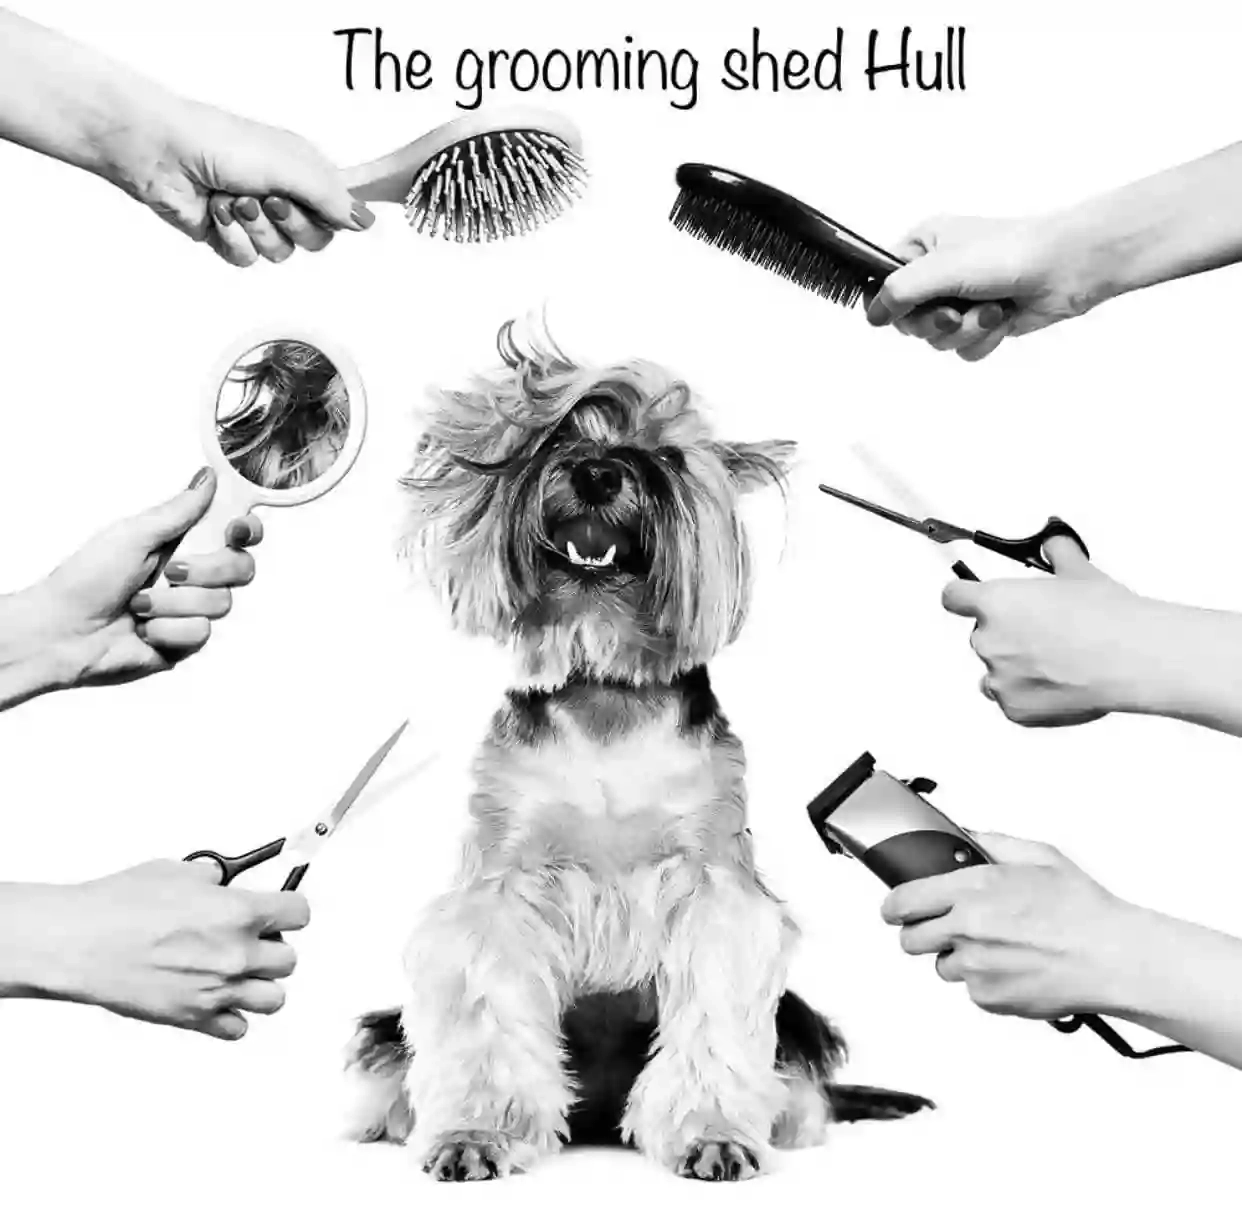 The Grooming Shed Hull